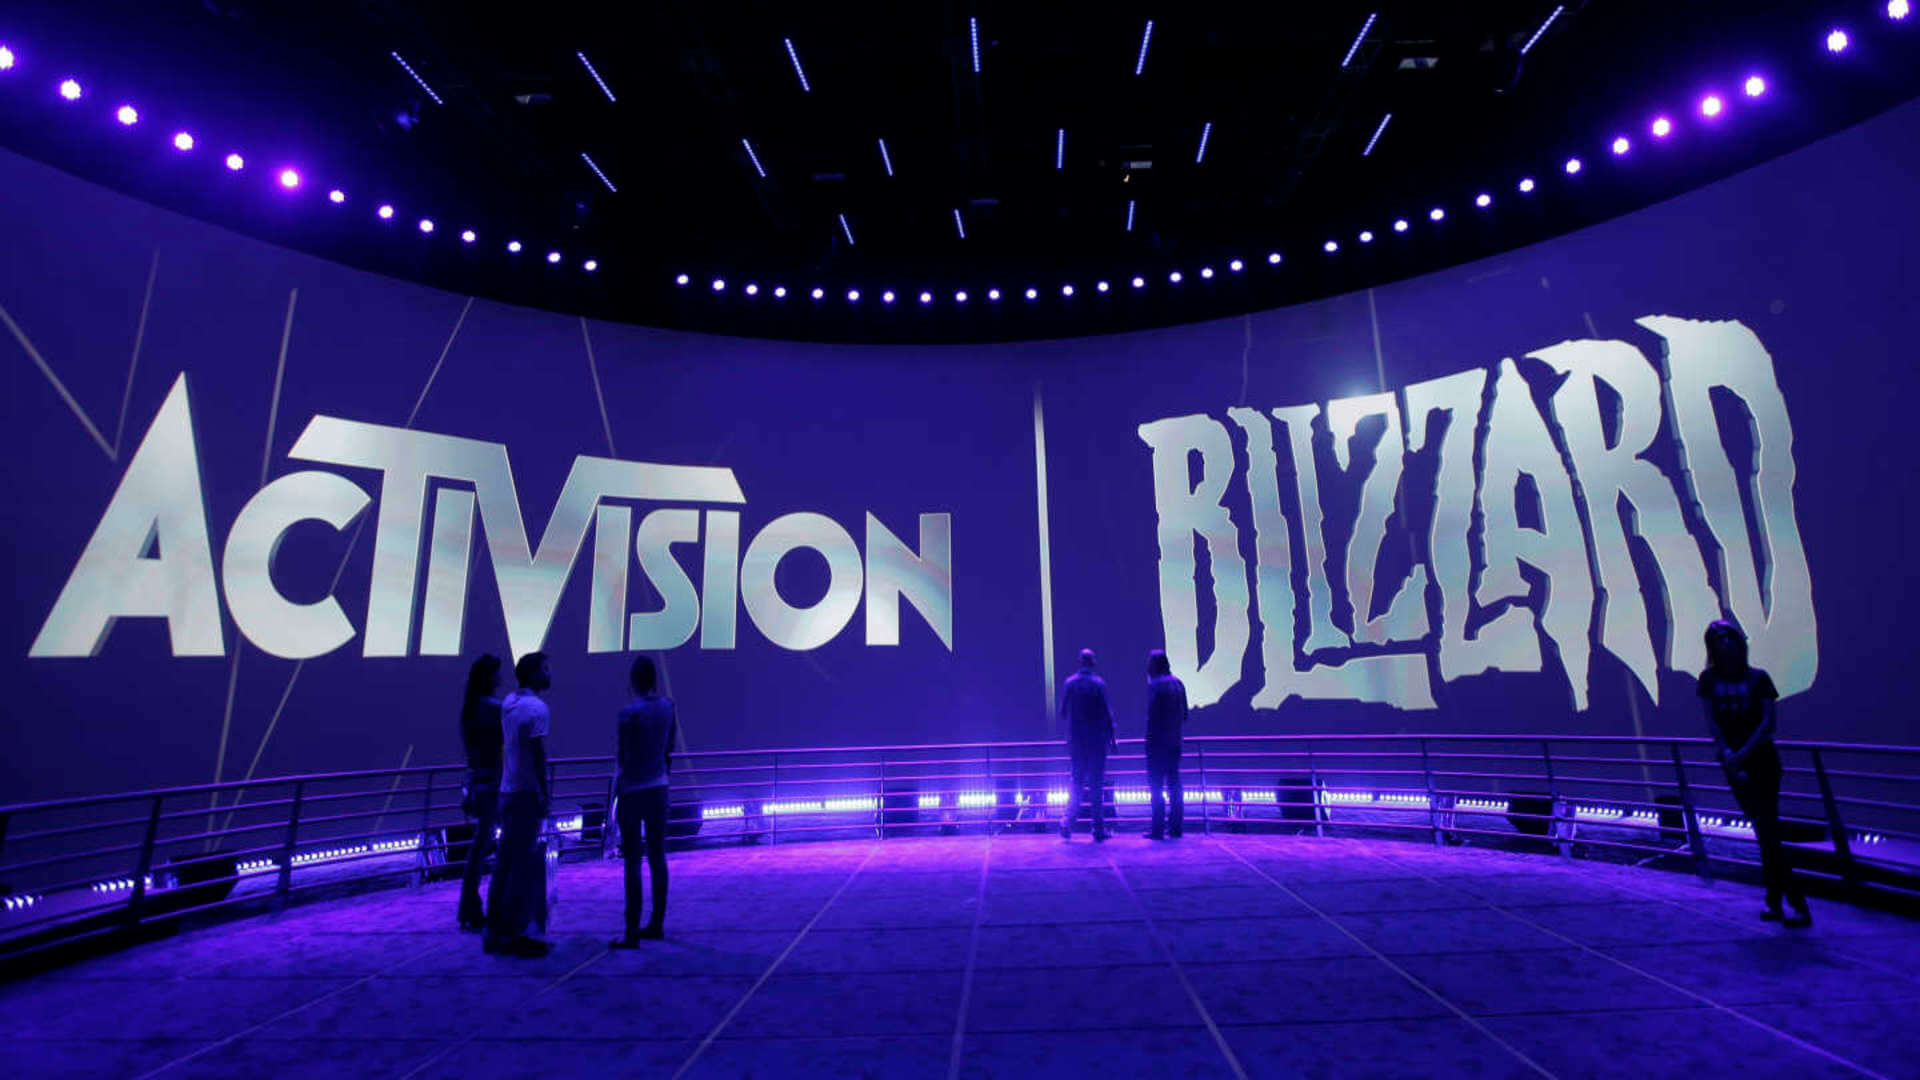 Activision Blizzard Sued Over Sexual Harassment, Unequal Pay